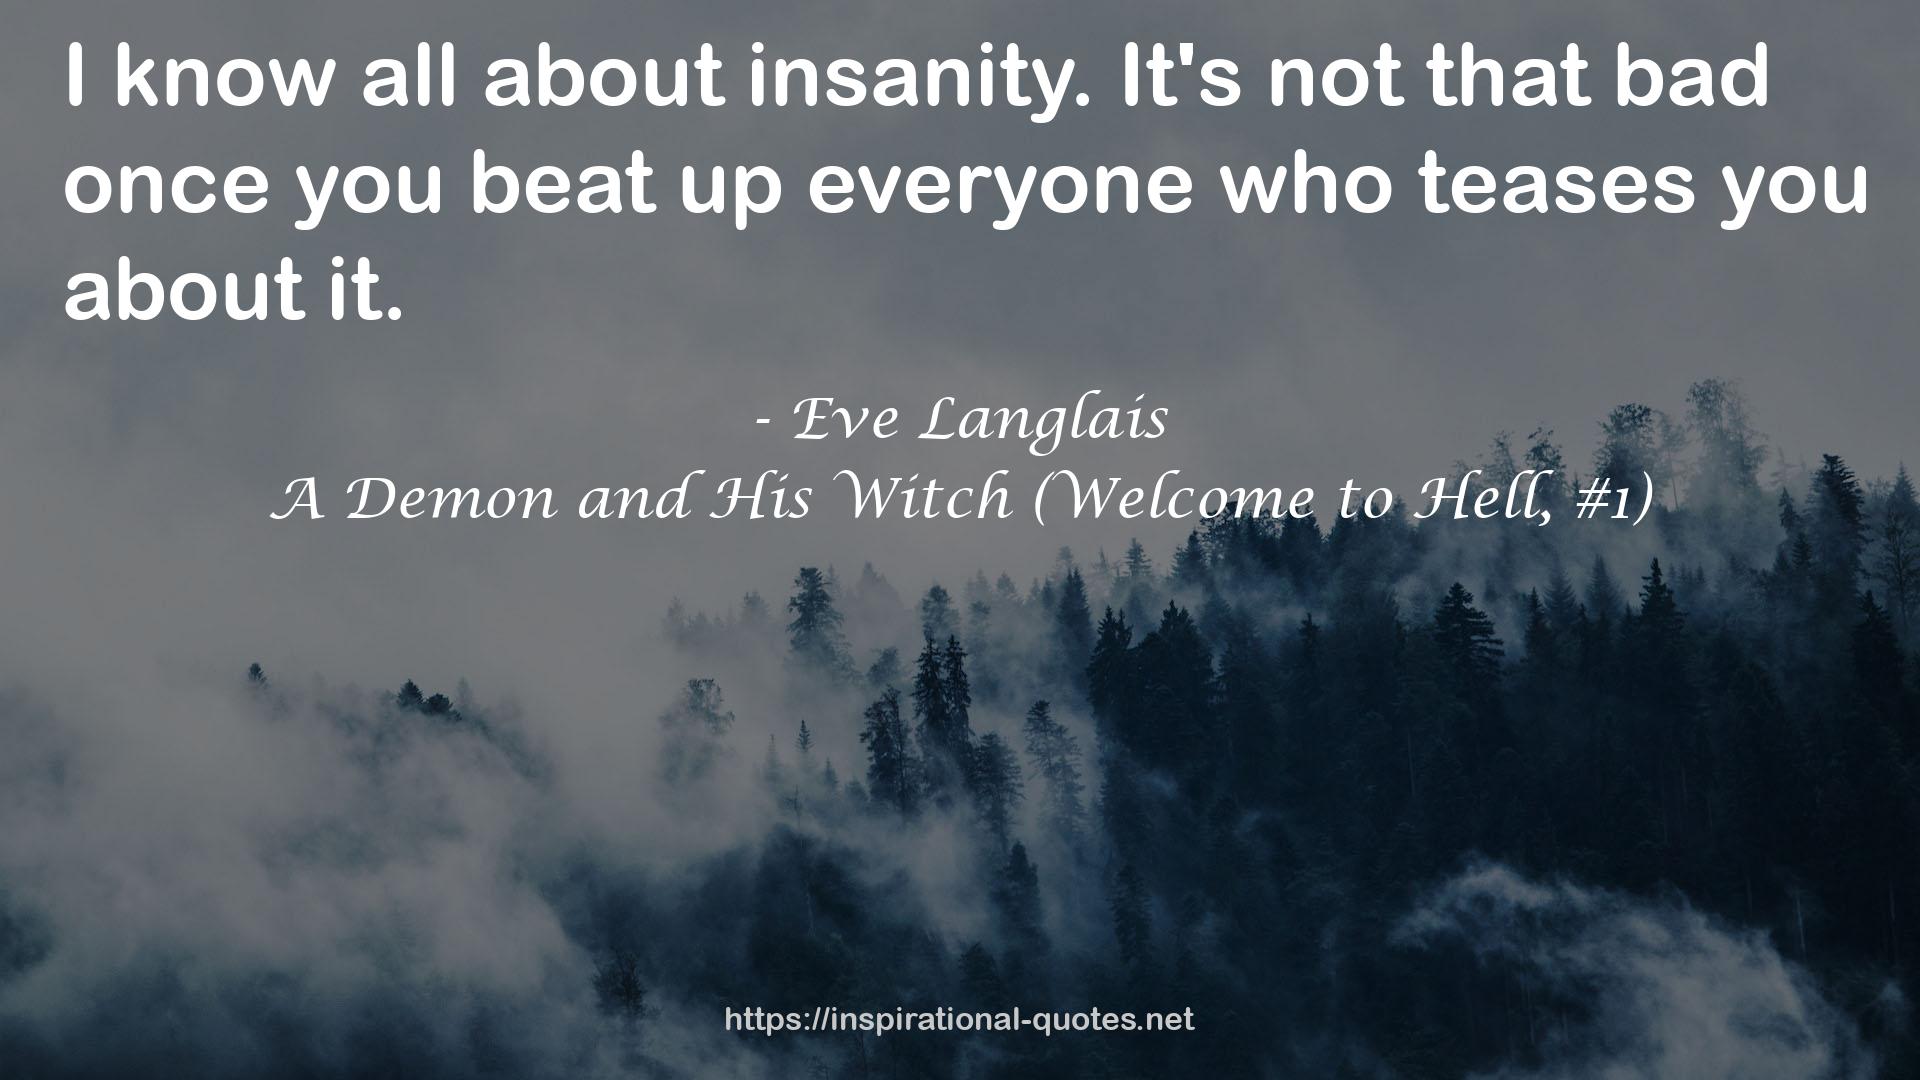 A Demon and His Witch (Welcome to Hell, #1) QUOTES